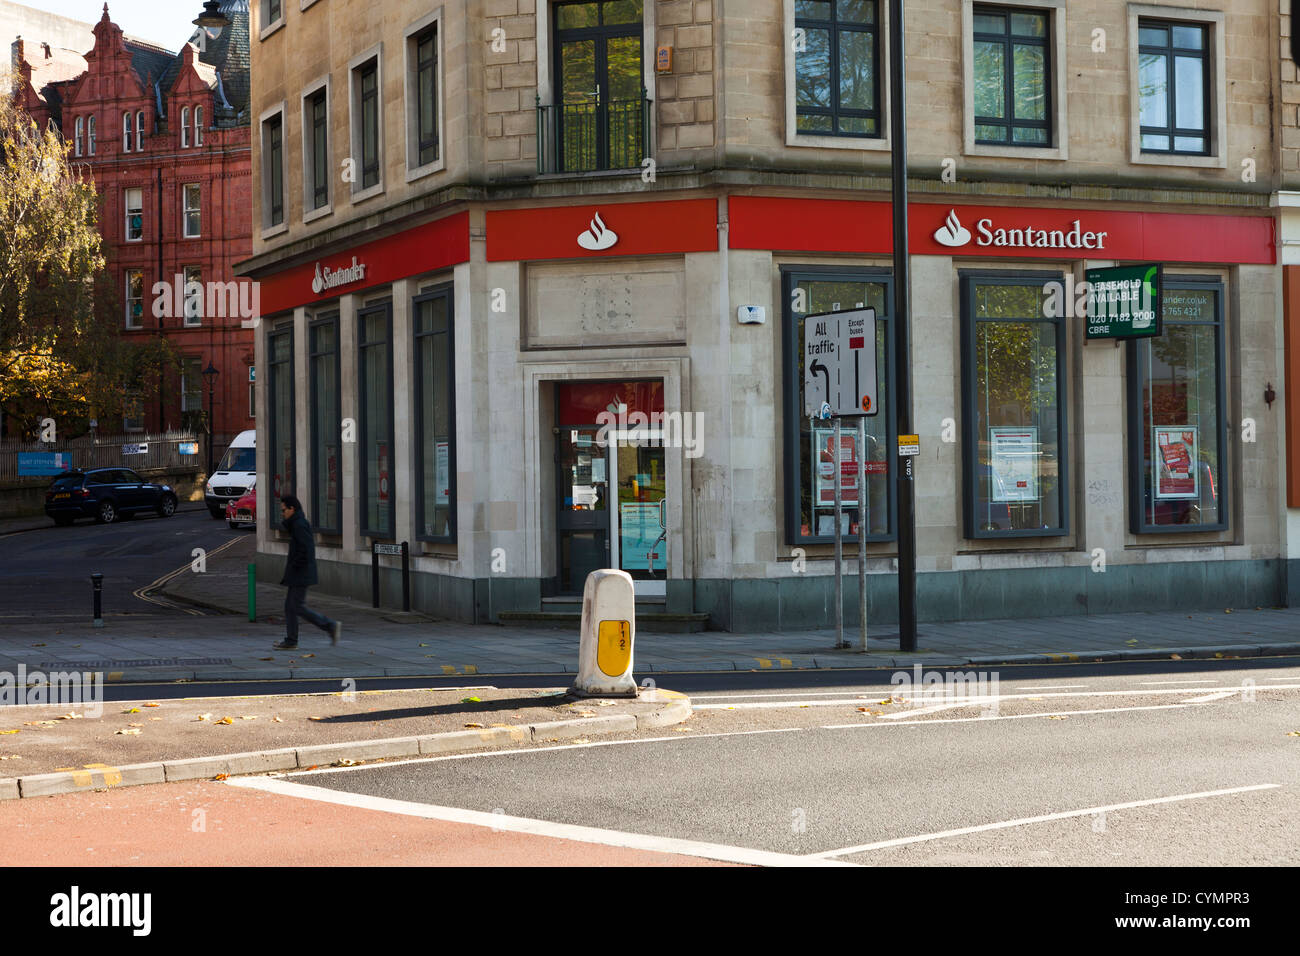 Santander bank premises up for sale, banking and economic crisis forcing many banks to close a lot of branches, Colston Ave Bris Stock Photo